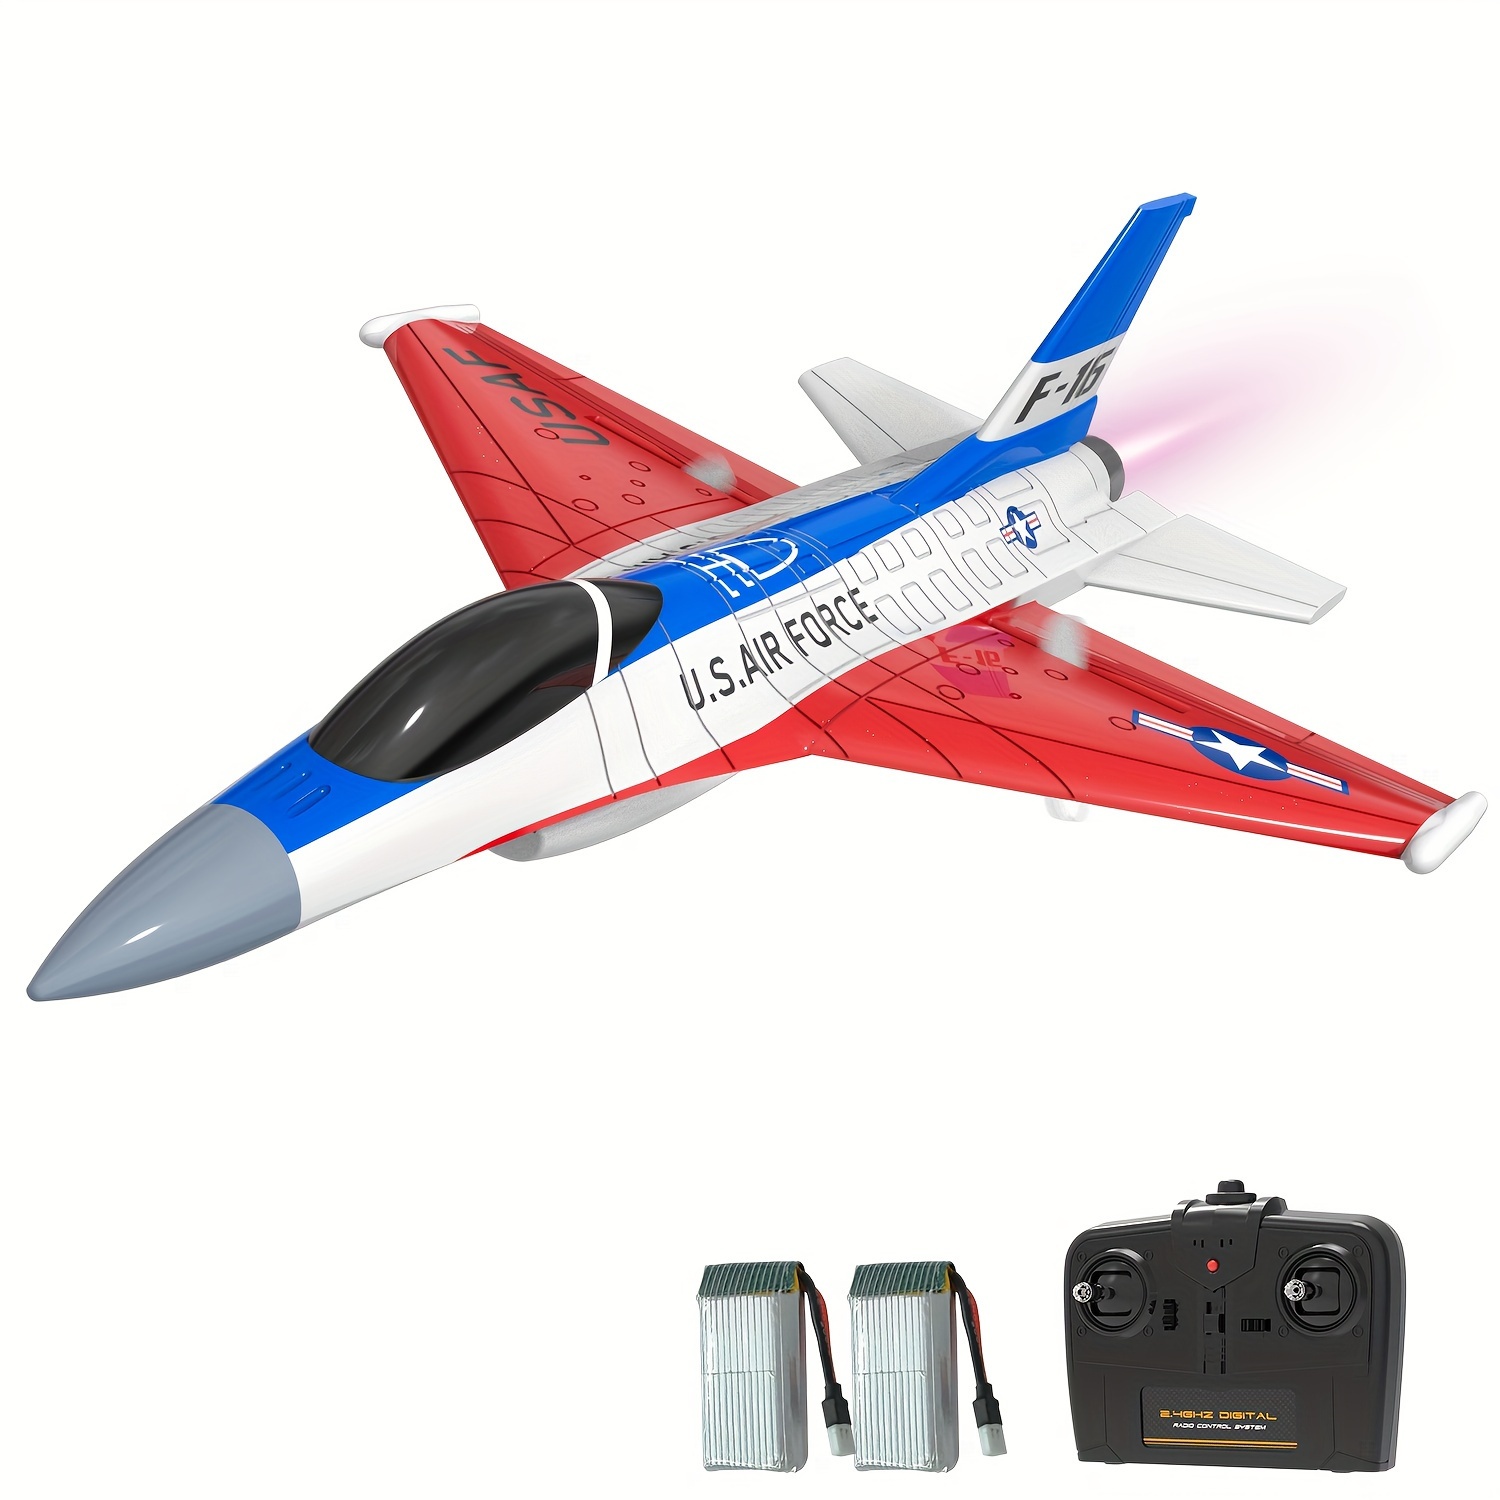 

Rc Airplane 2.4ghz 2ch F16 With Cool Lights Epp Foam Airplane Control Light Weight Gyro Stabilization System With 2 Batteries For Beginners 762-4 Pnp/rtf